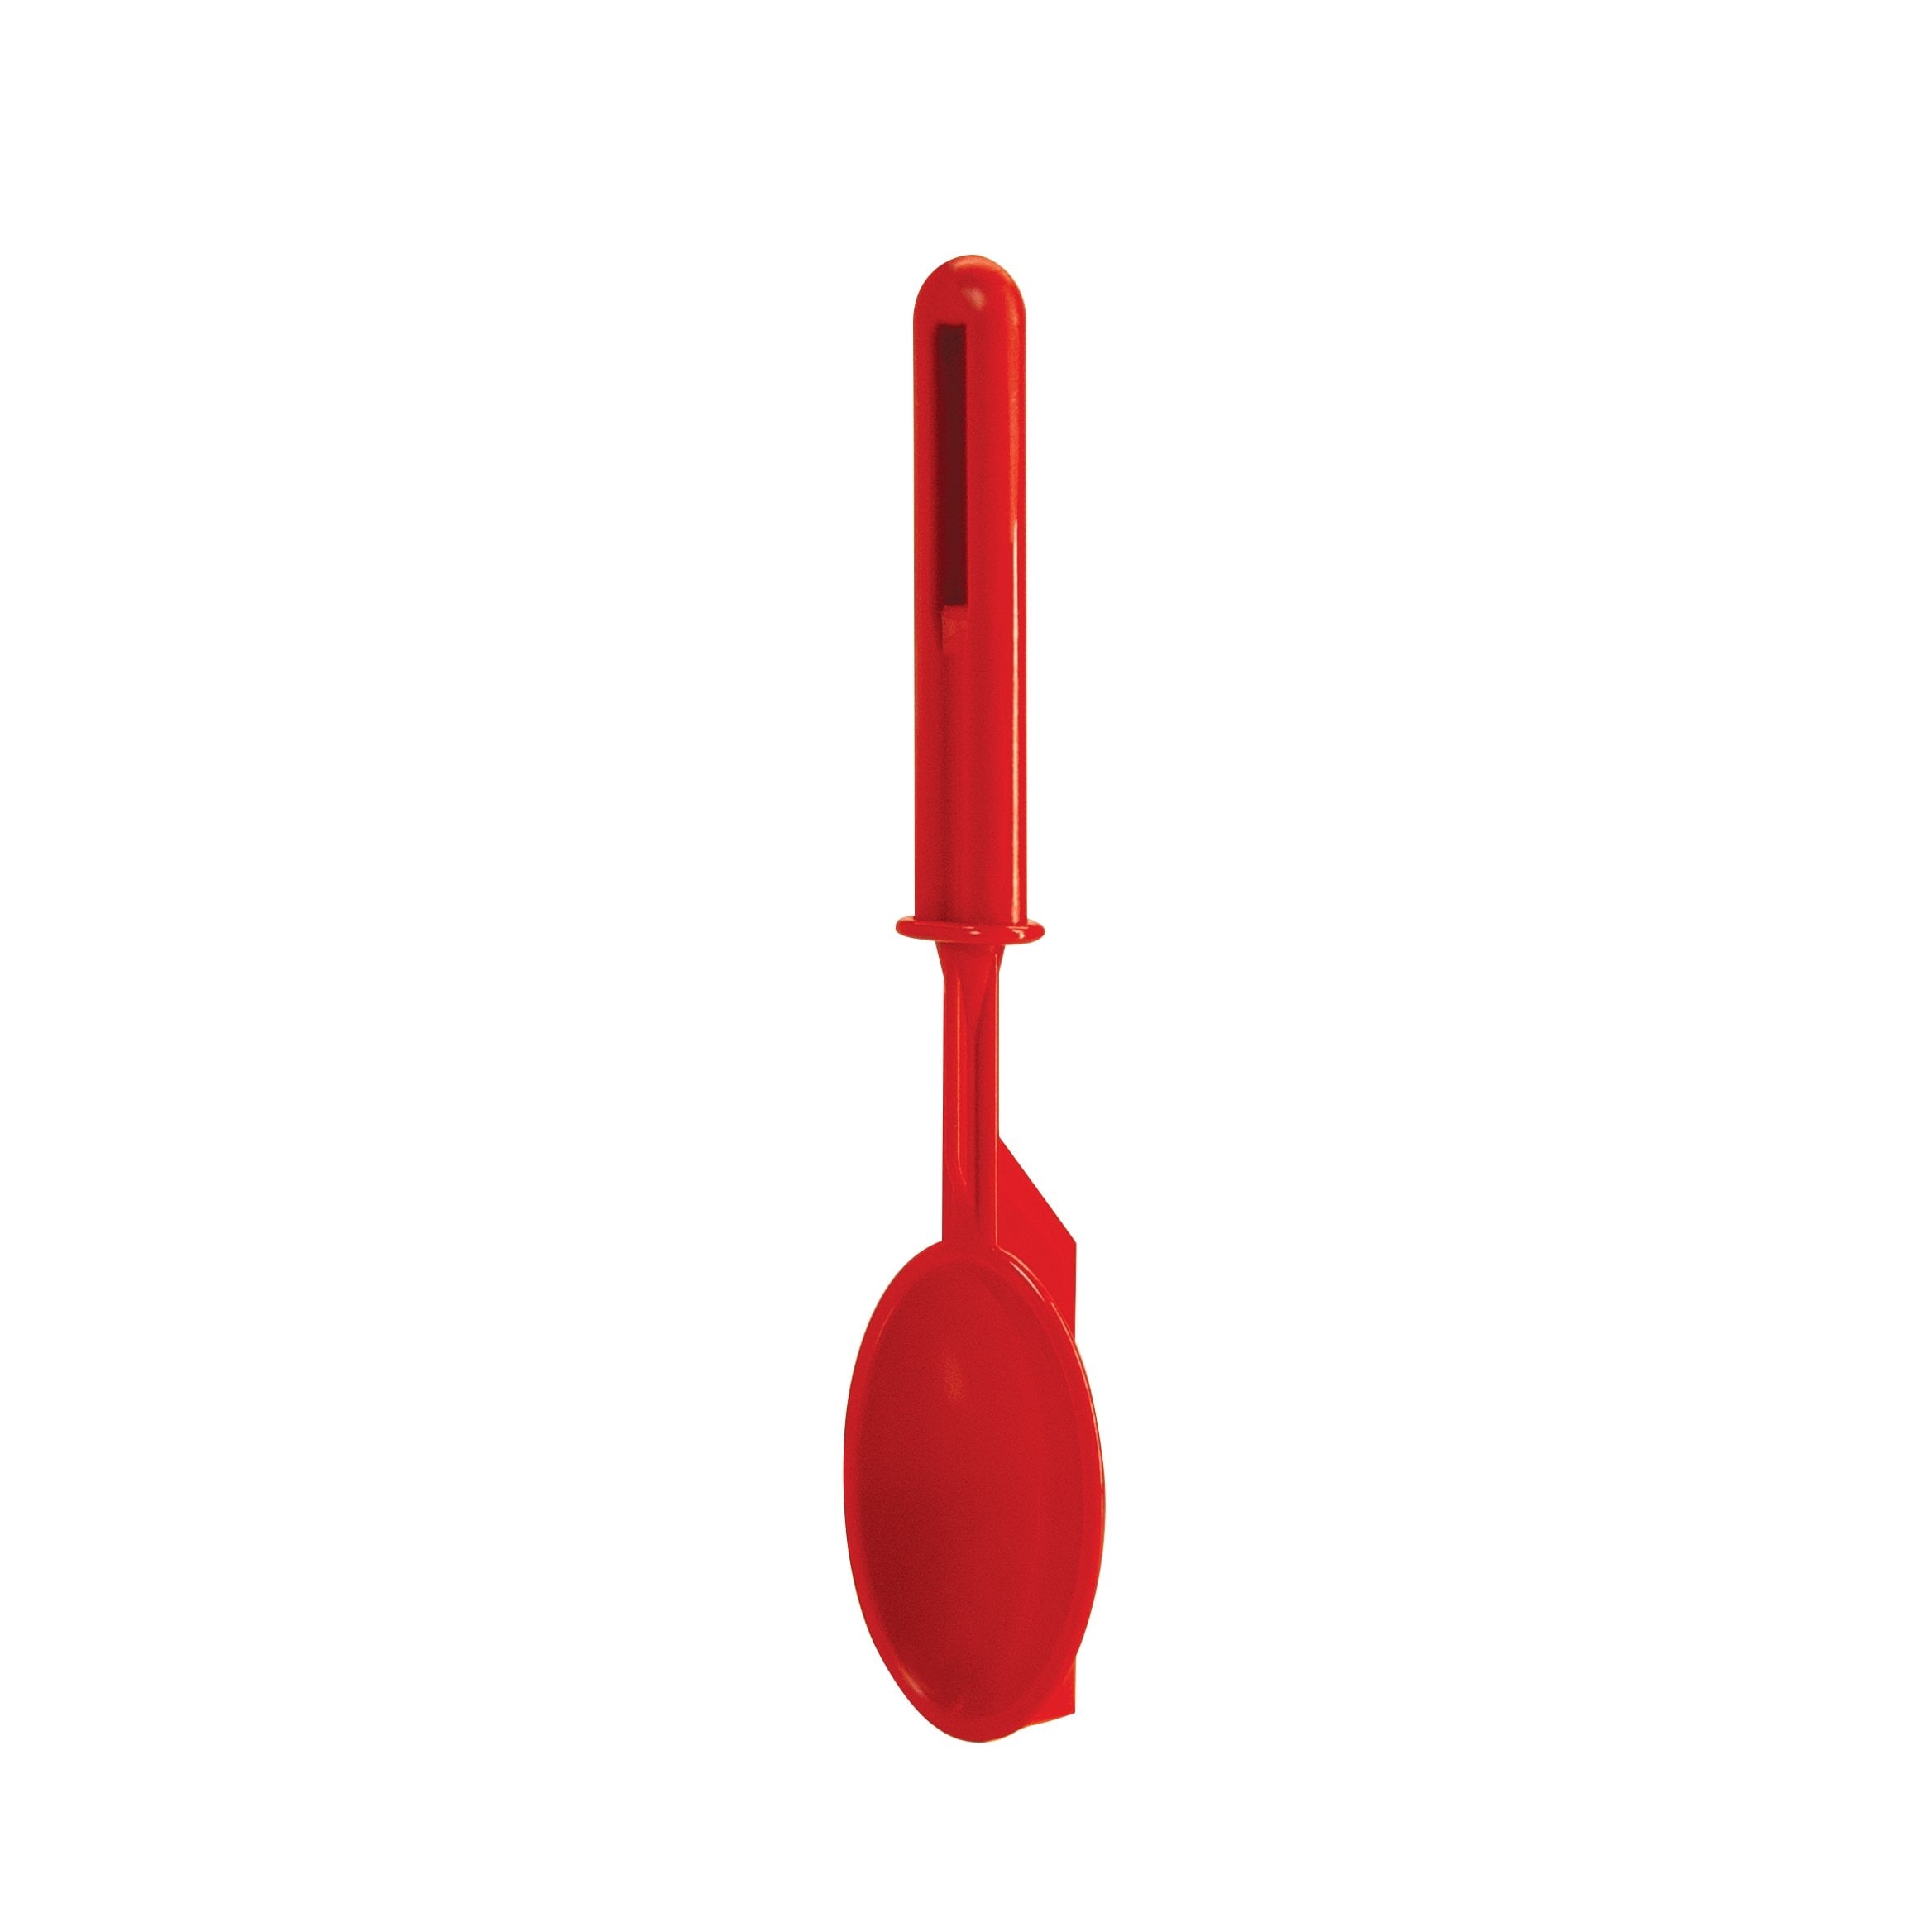 https://ak1.ostkcdn.com/images/products/is/images/direct/63d5fe21bd15bda0703a92a3b490435d48ca3249/The-SpoonStir---Food-Chopper-Scooping-Chopping-Scraping-%26-Stirring-Utensil.jpg